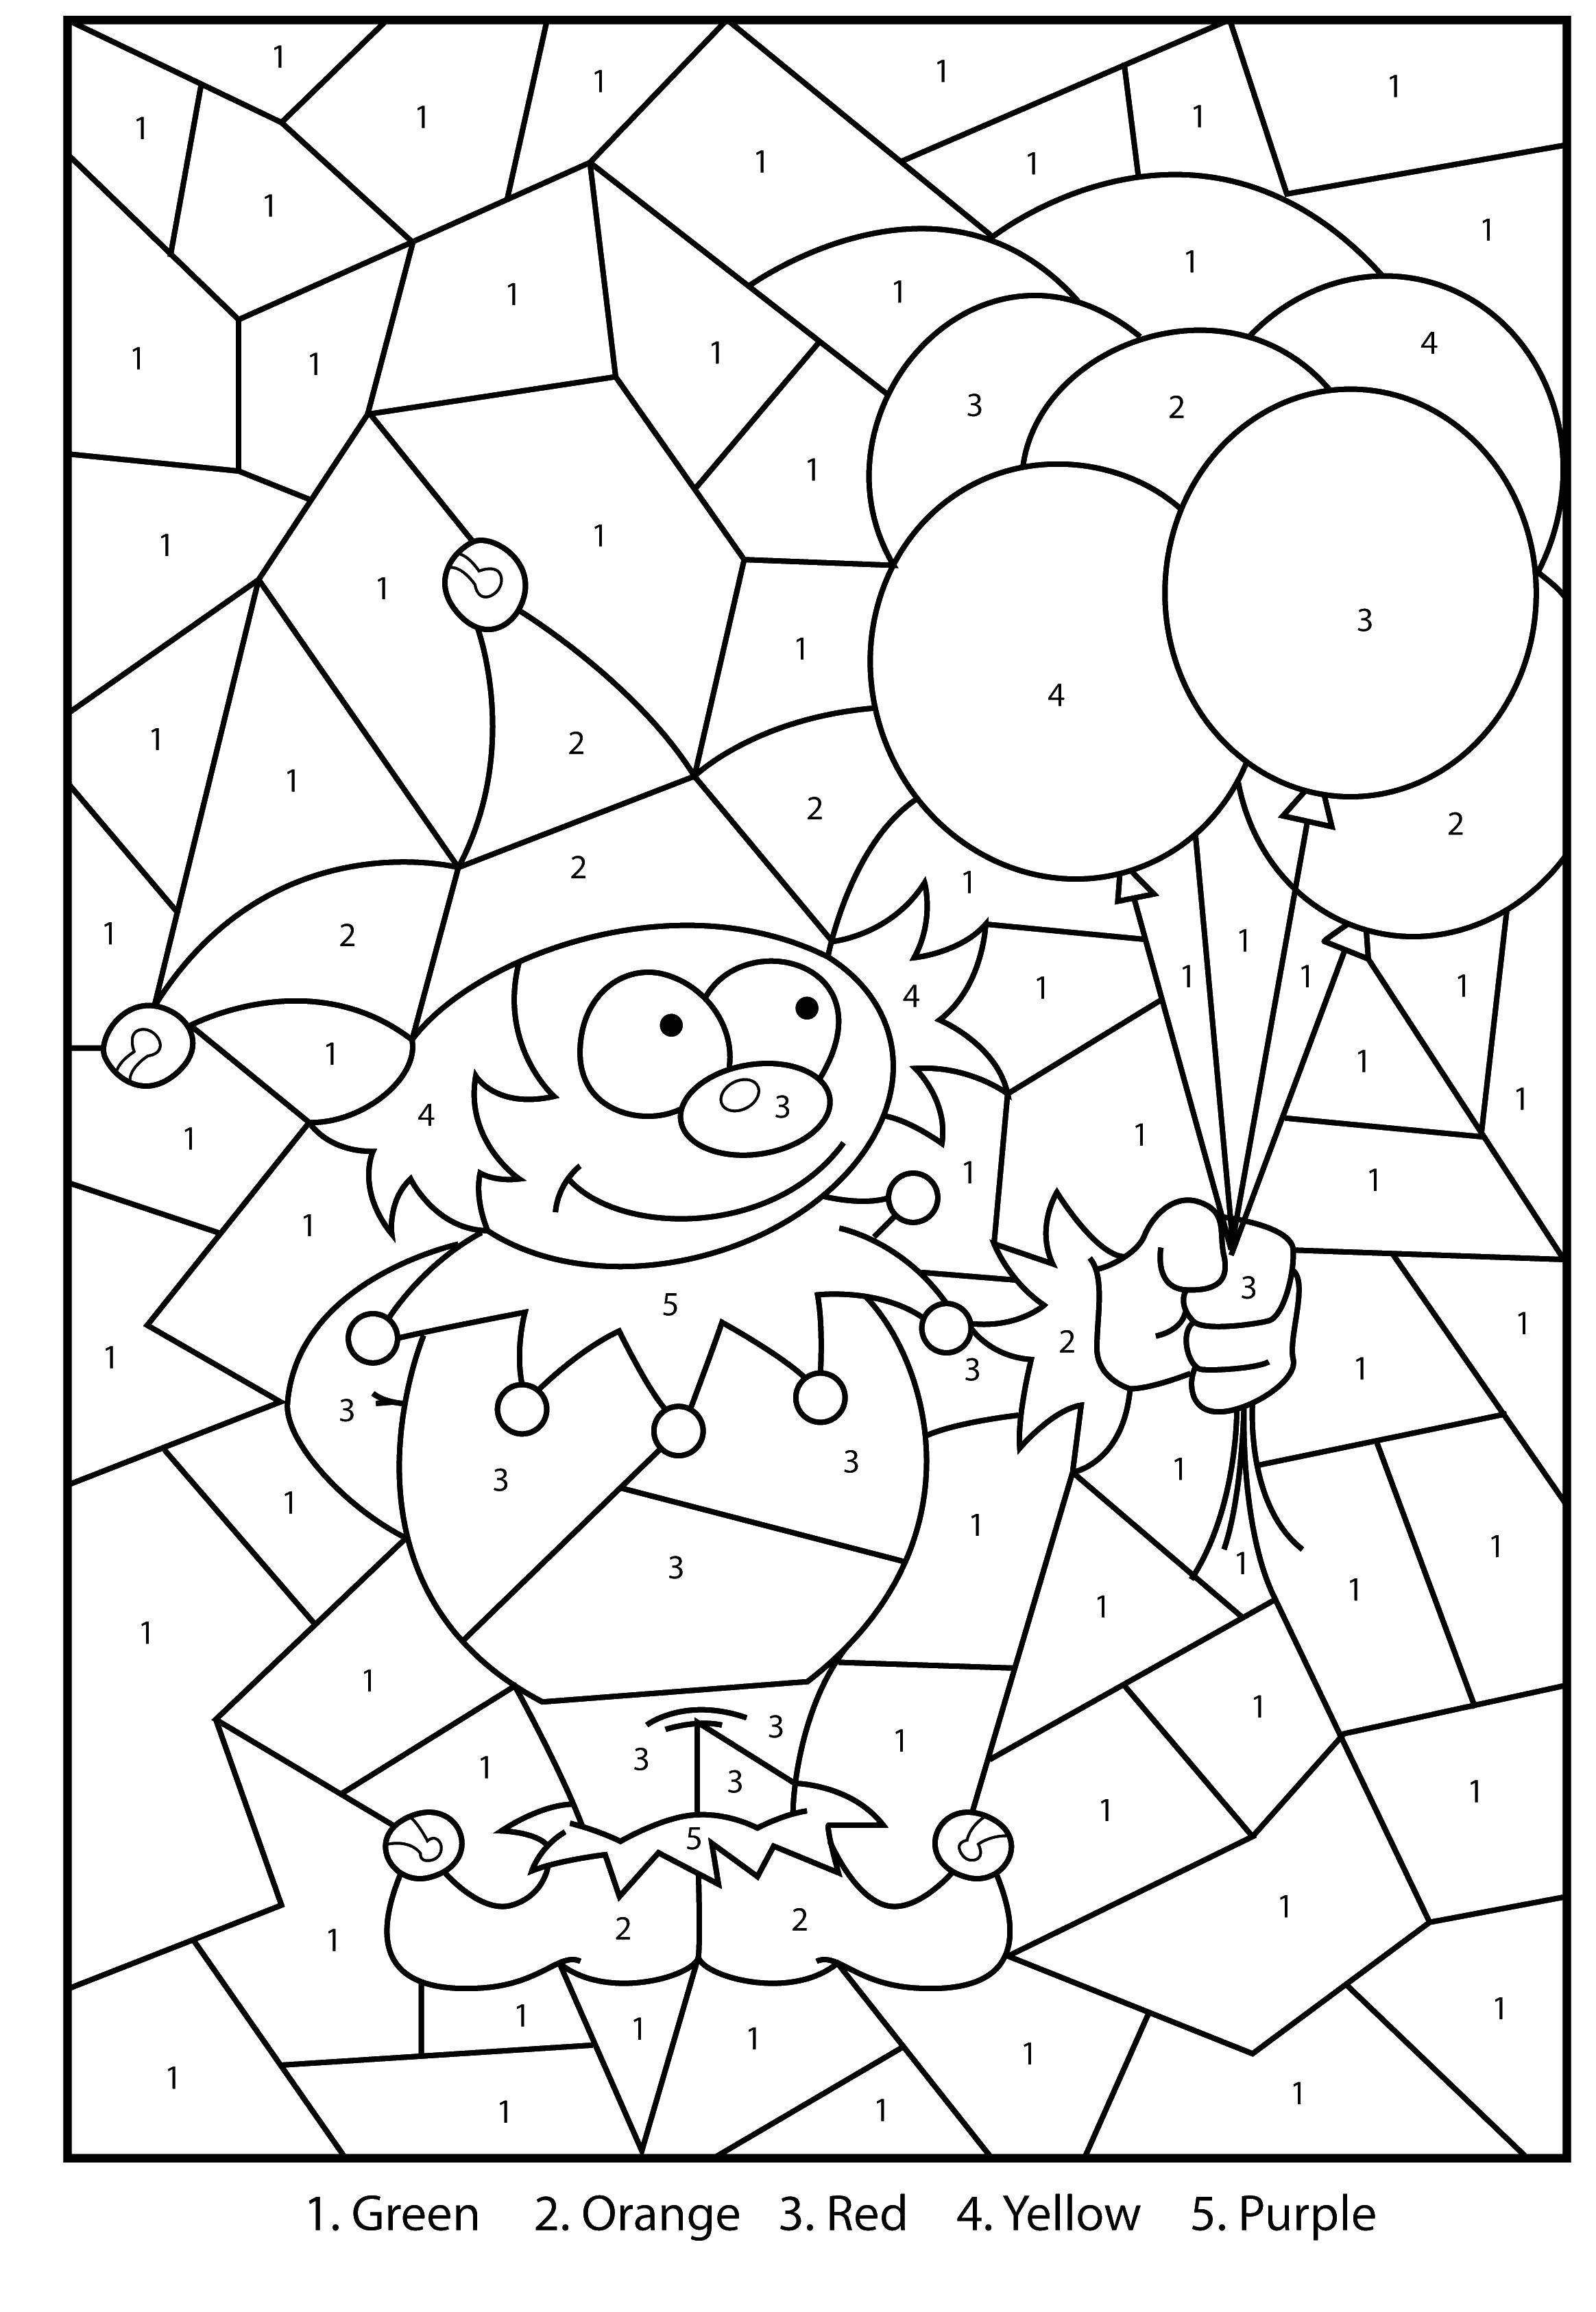 Coloring Clown with balloons. Category That number. Tags:  clown, balls, nose, costume.